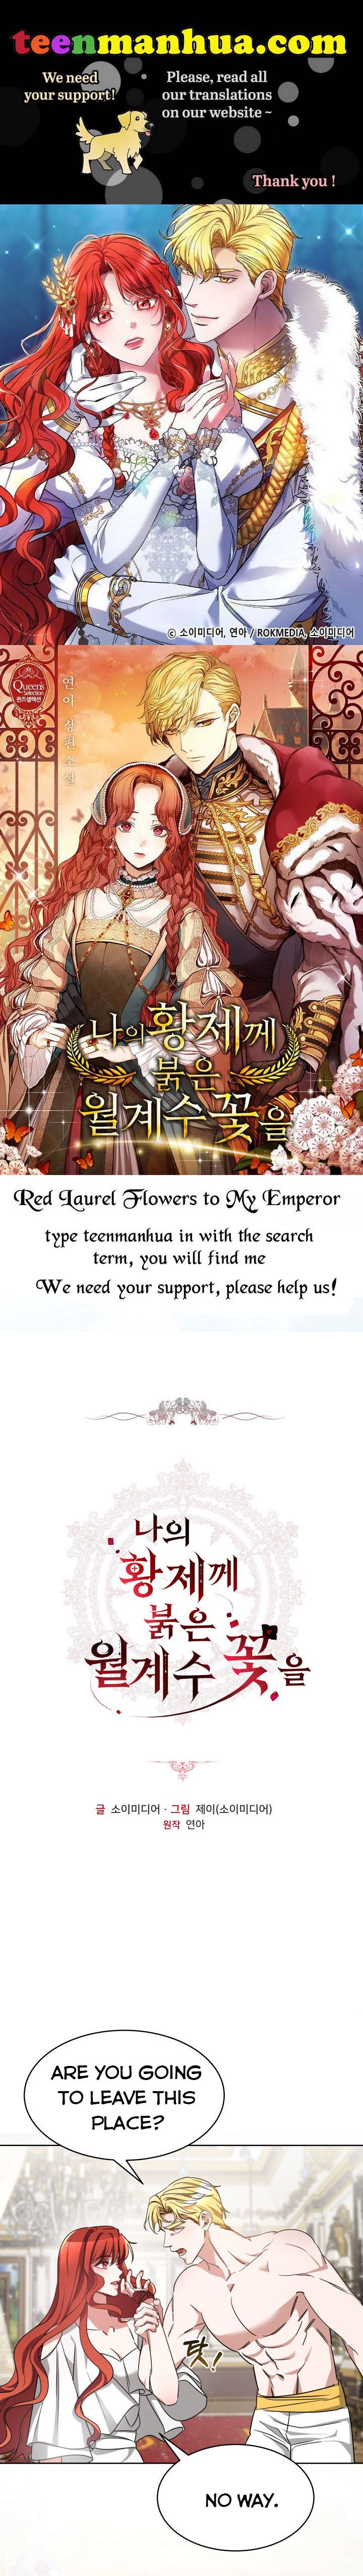 Red Laurel Flowers To My Emperor - Page 1